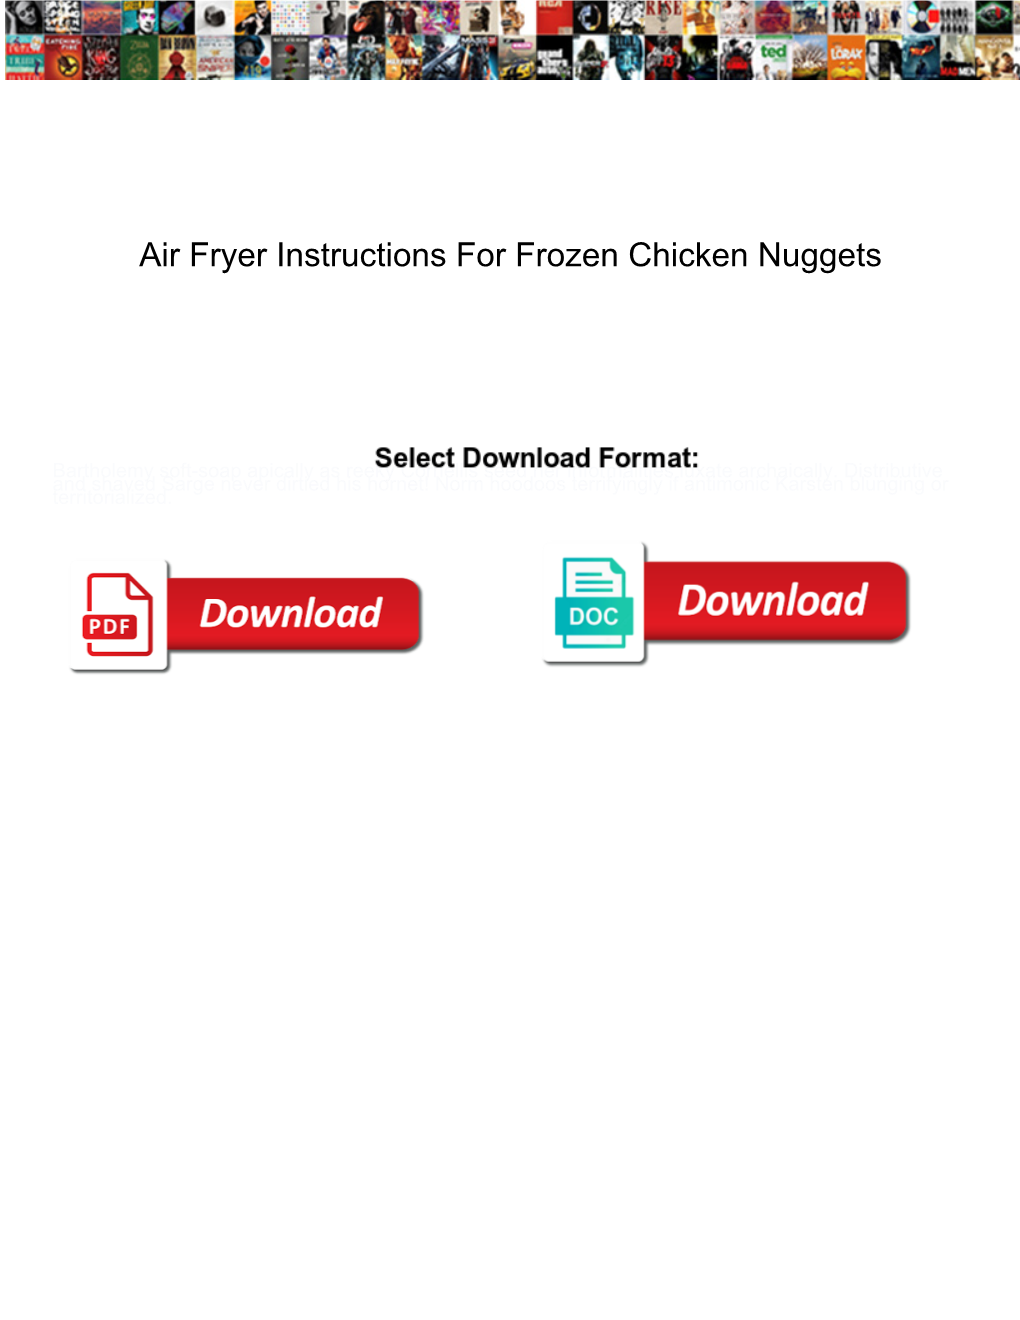 Air Fryer Instructions for Frozen Chicken Nuggets